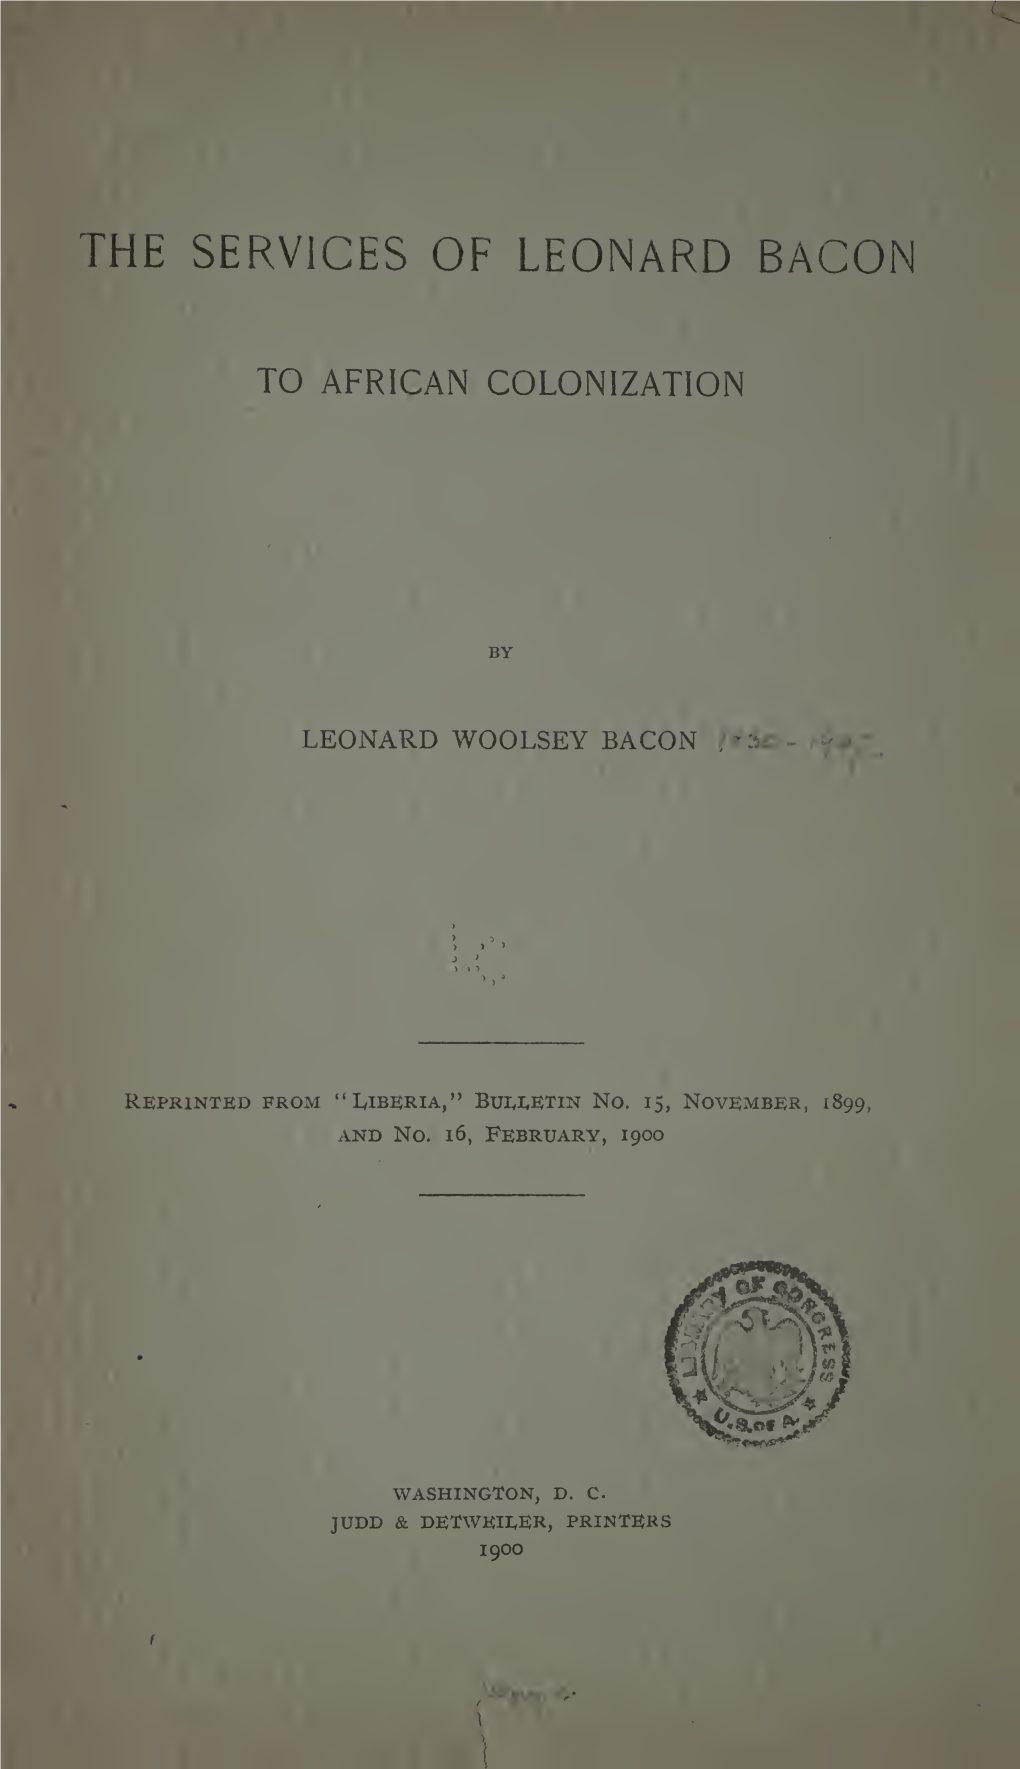 The Services of Leonard Bacon to African Colonization;